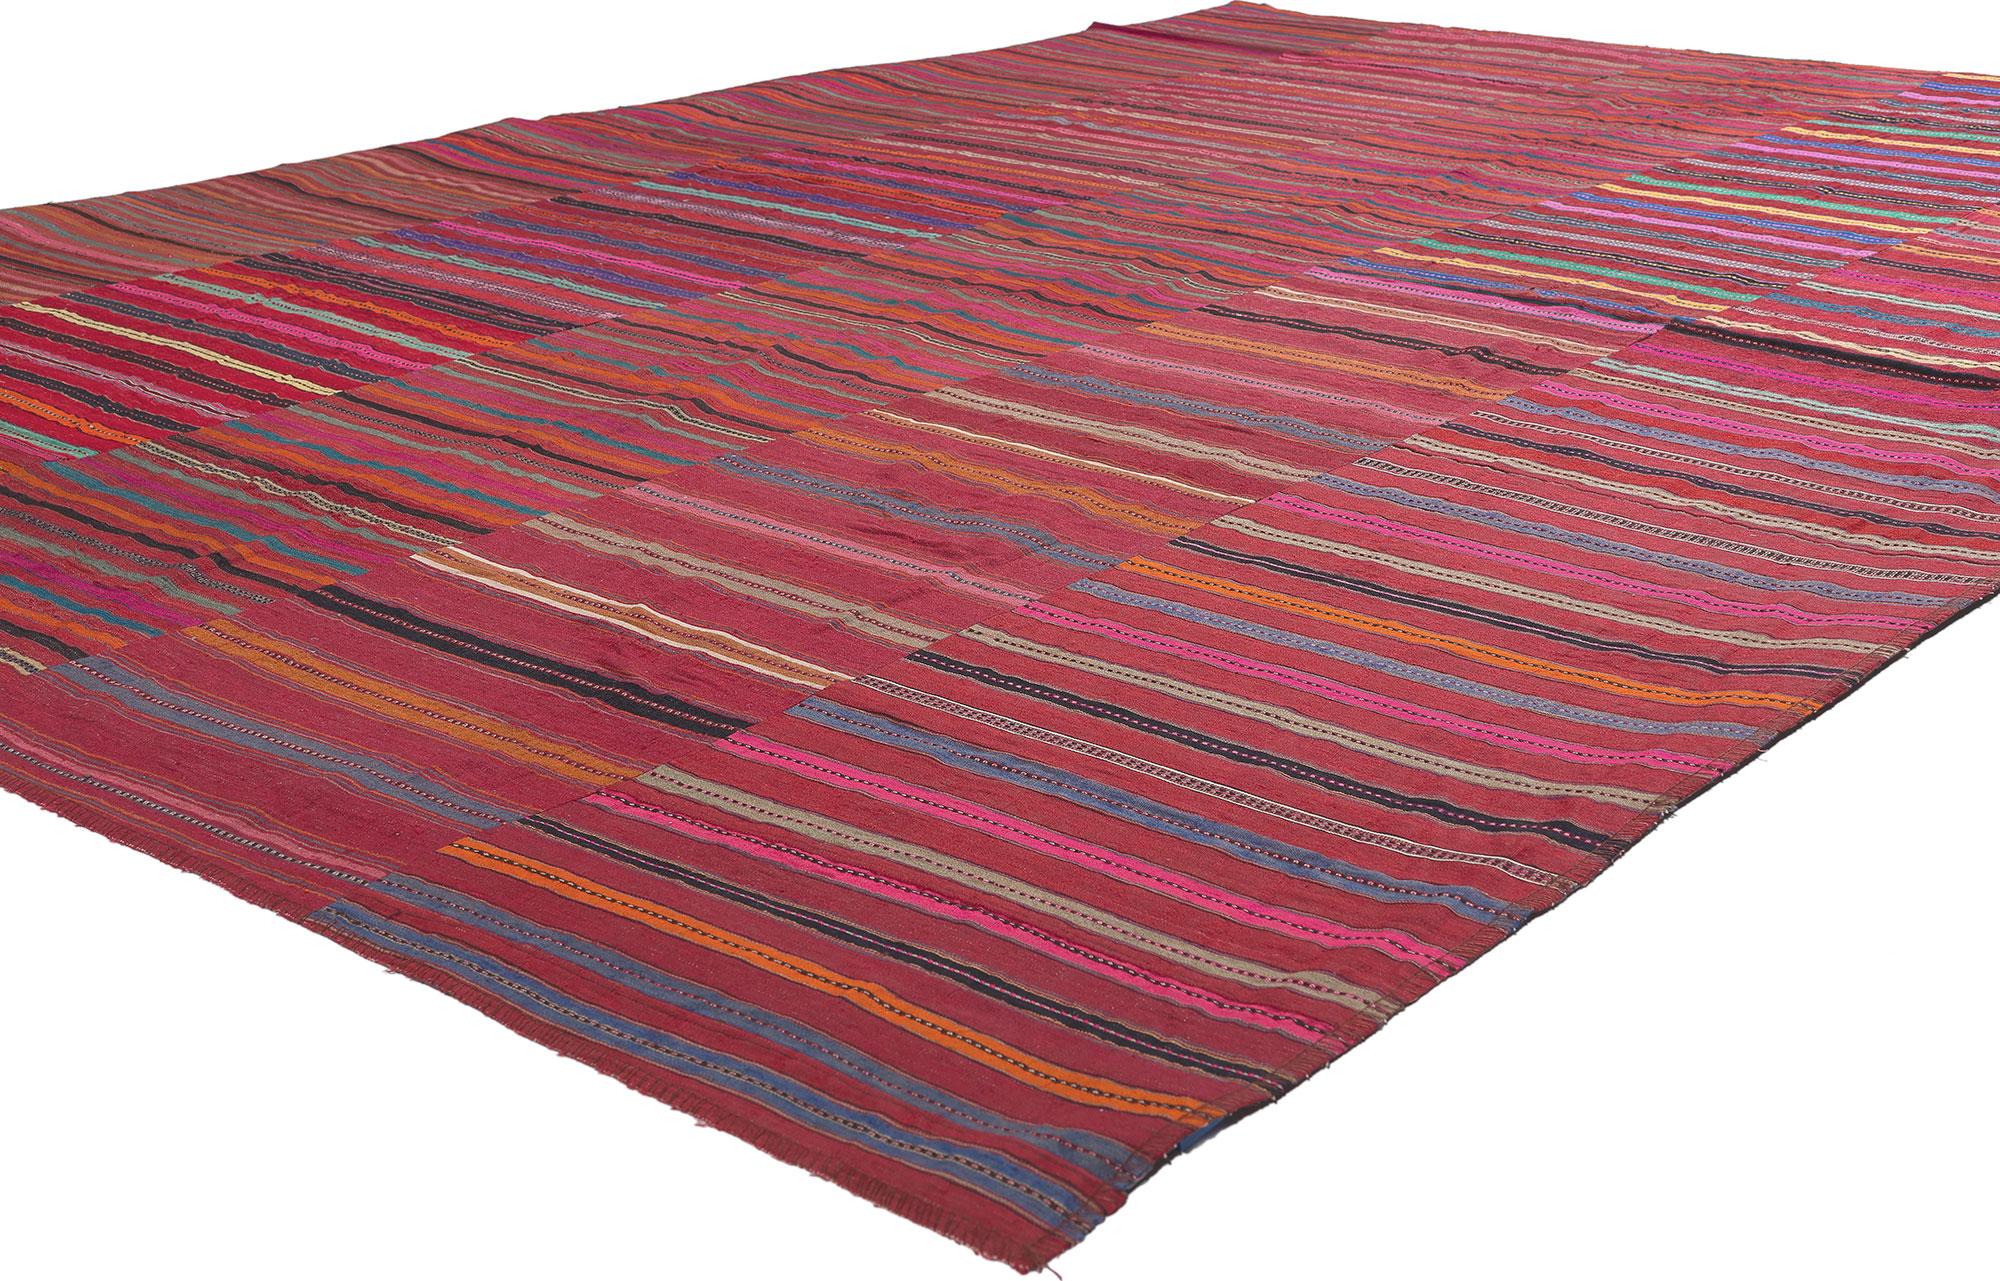 60649 Vintage Turkish Striped Kilim Rug, 06'07 x 09'10.
Weathered charm and rugged beauty collides with rustic sensibility in this handwoven wool vintage Turkish kilim rug. The striped panel design and lively colors woven into this piece work